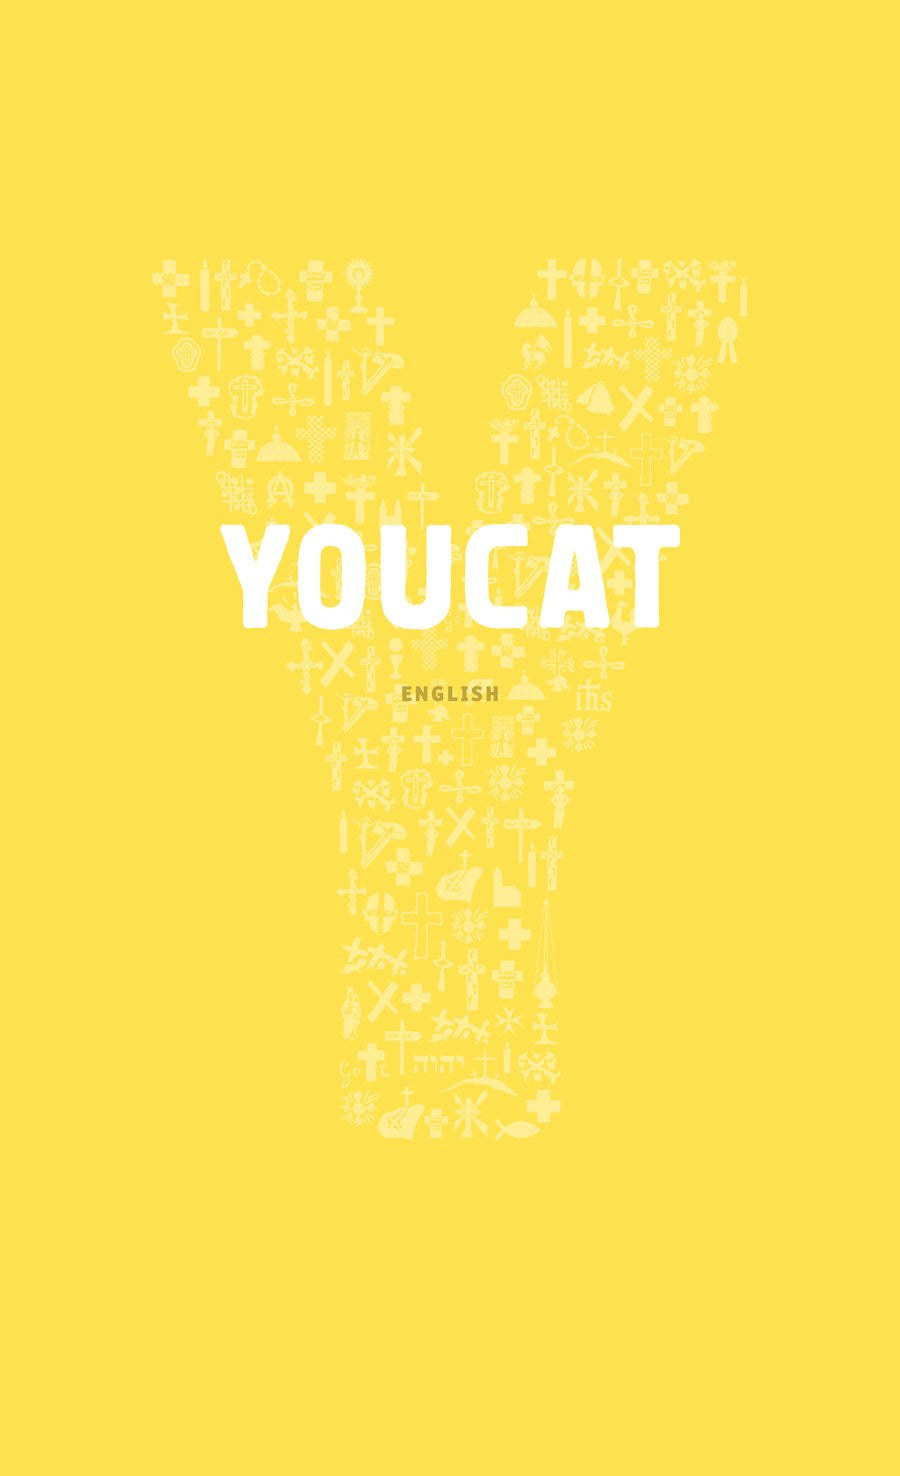 YOUCAT - Youth Catechism of the Catholic Church